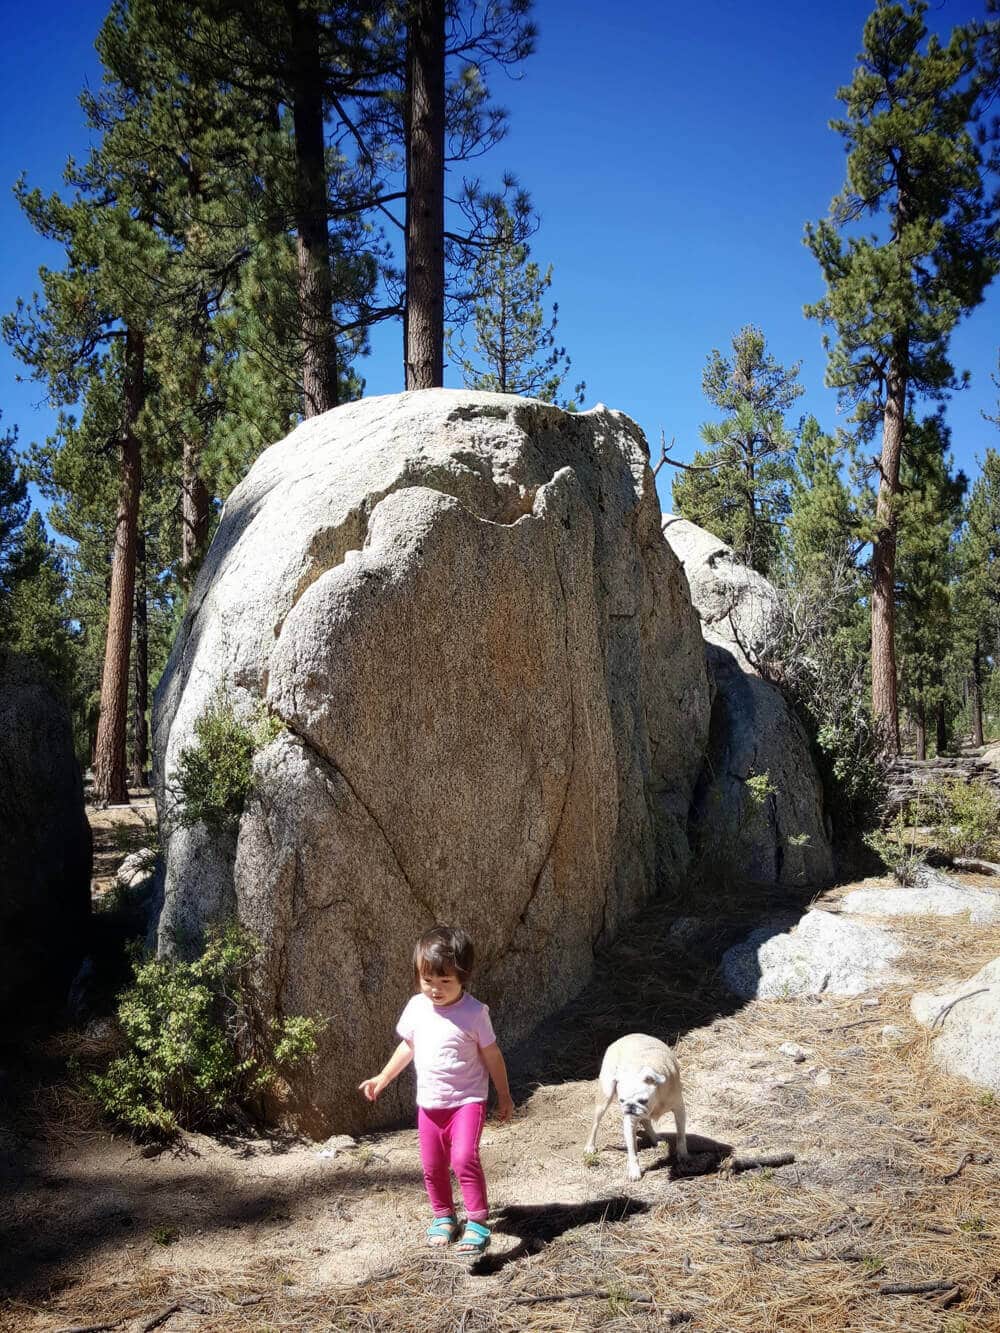 Hiking through pine forests and granite boulders